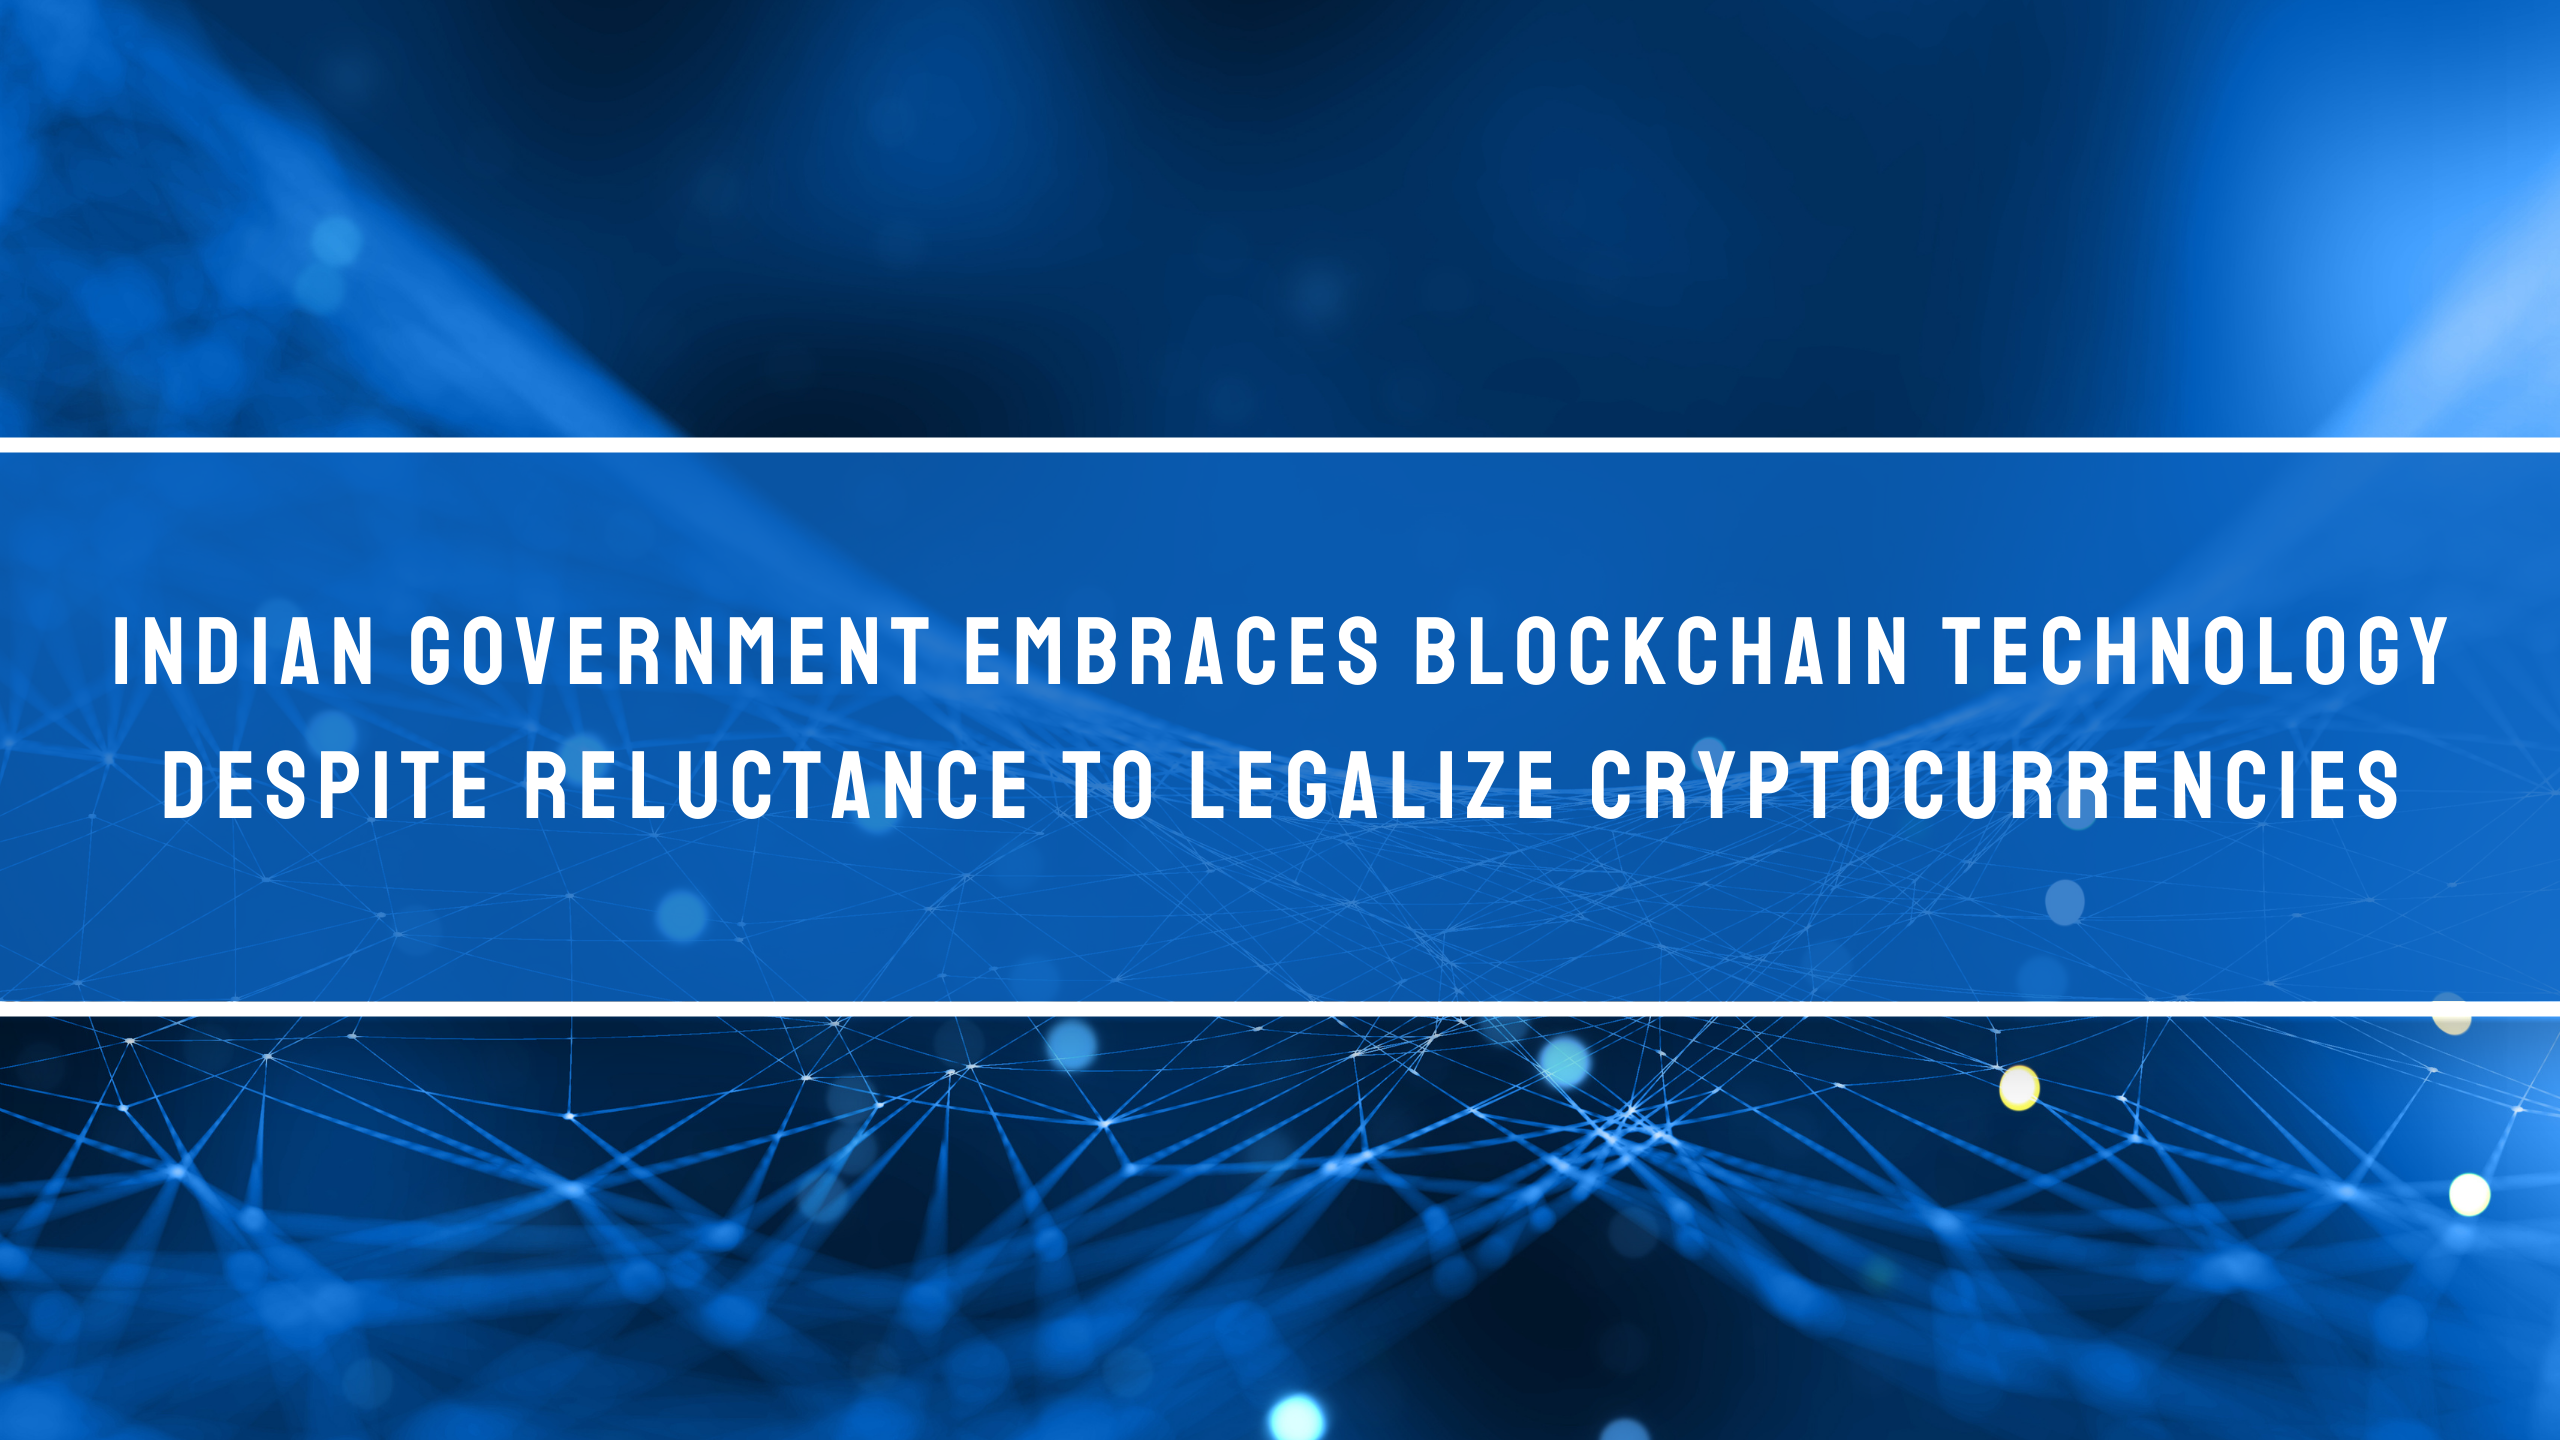 Indian Government Embraces Blockchain Technology Despite Reluctance to Legalize Cryptocurrencies